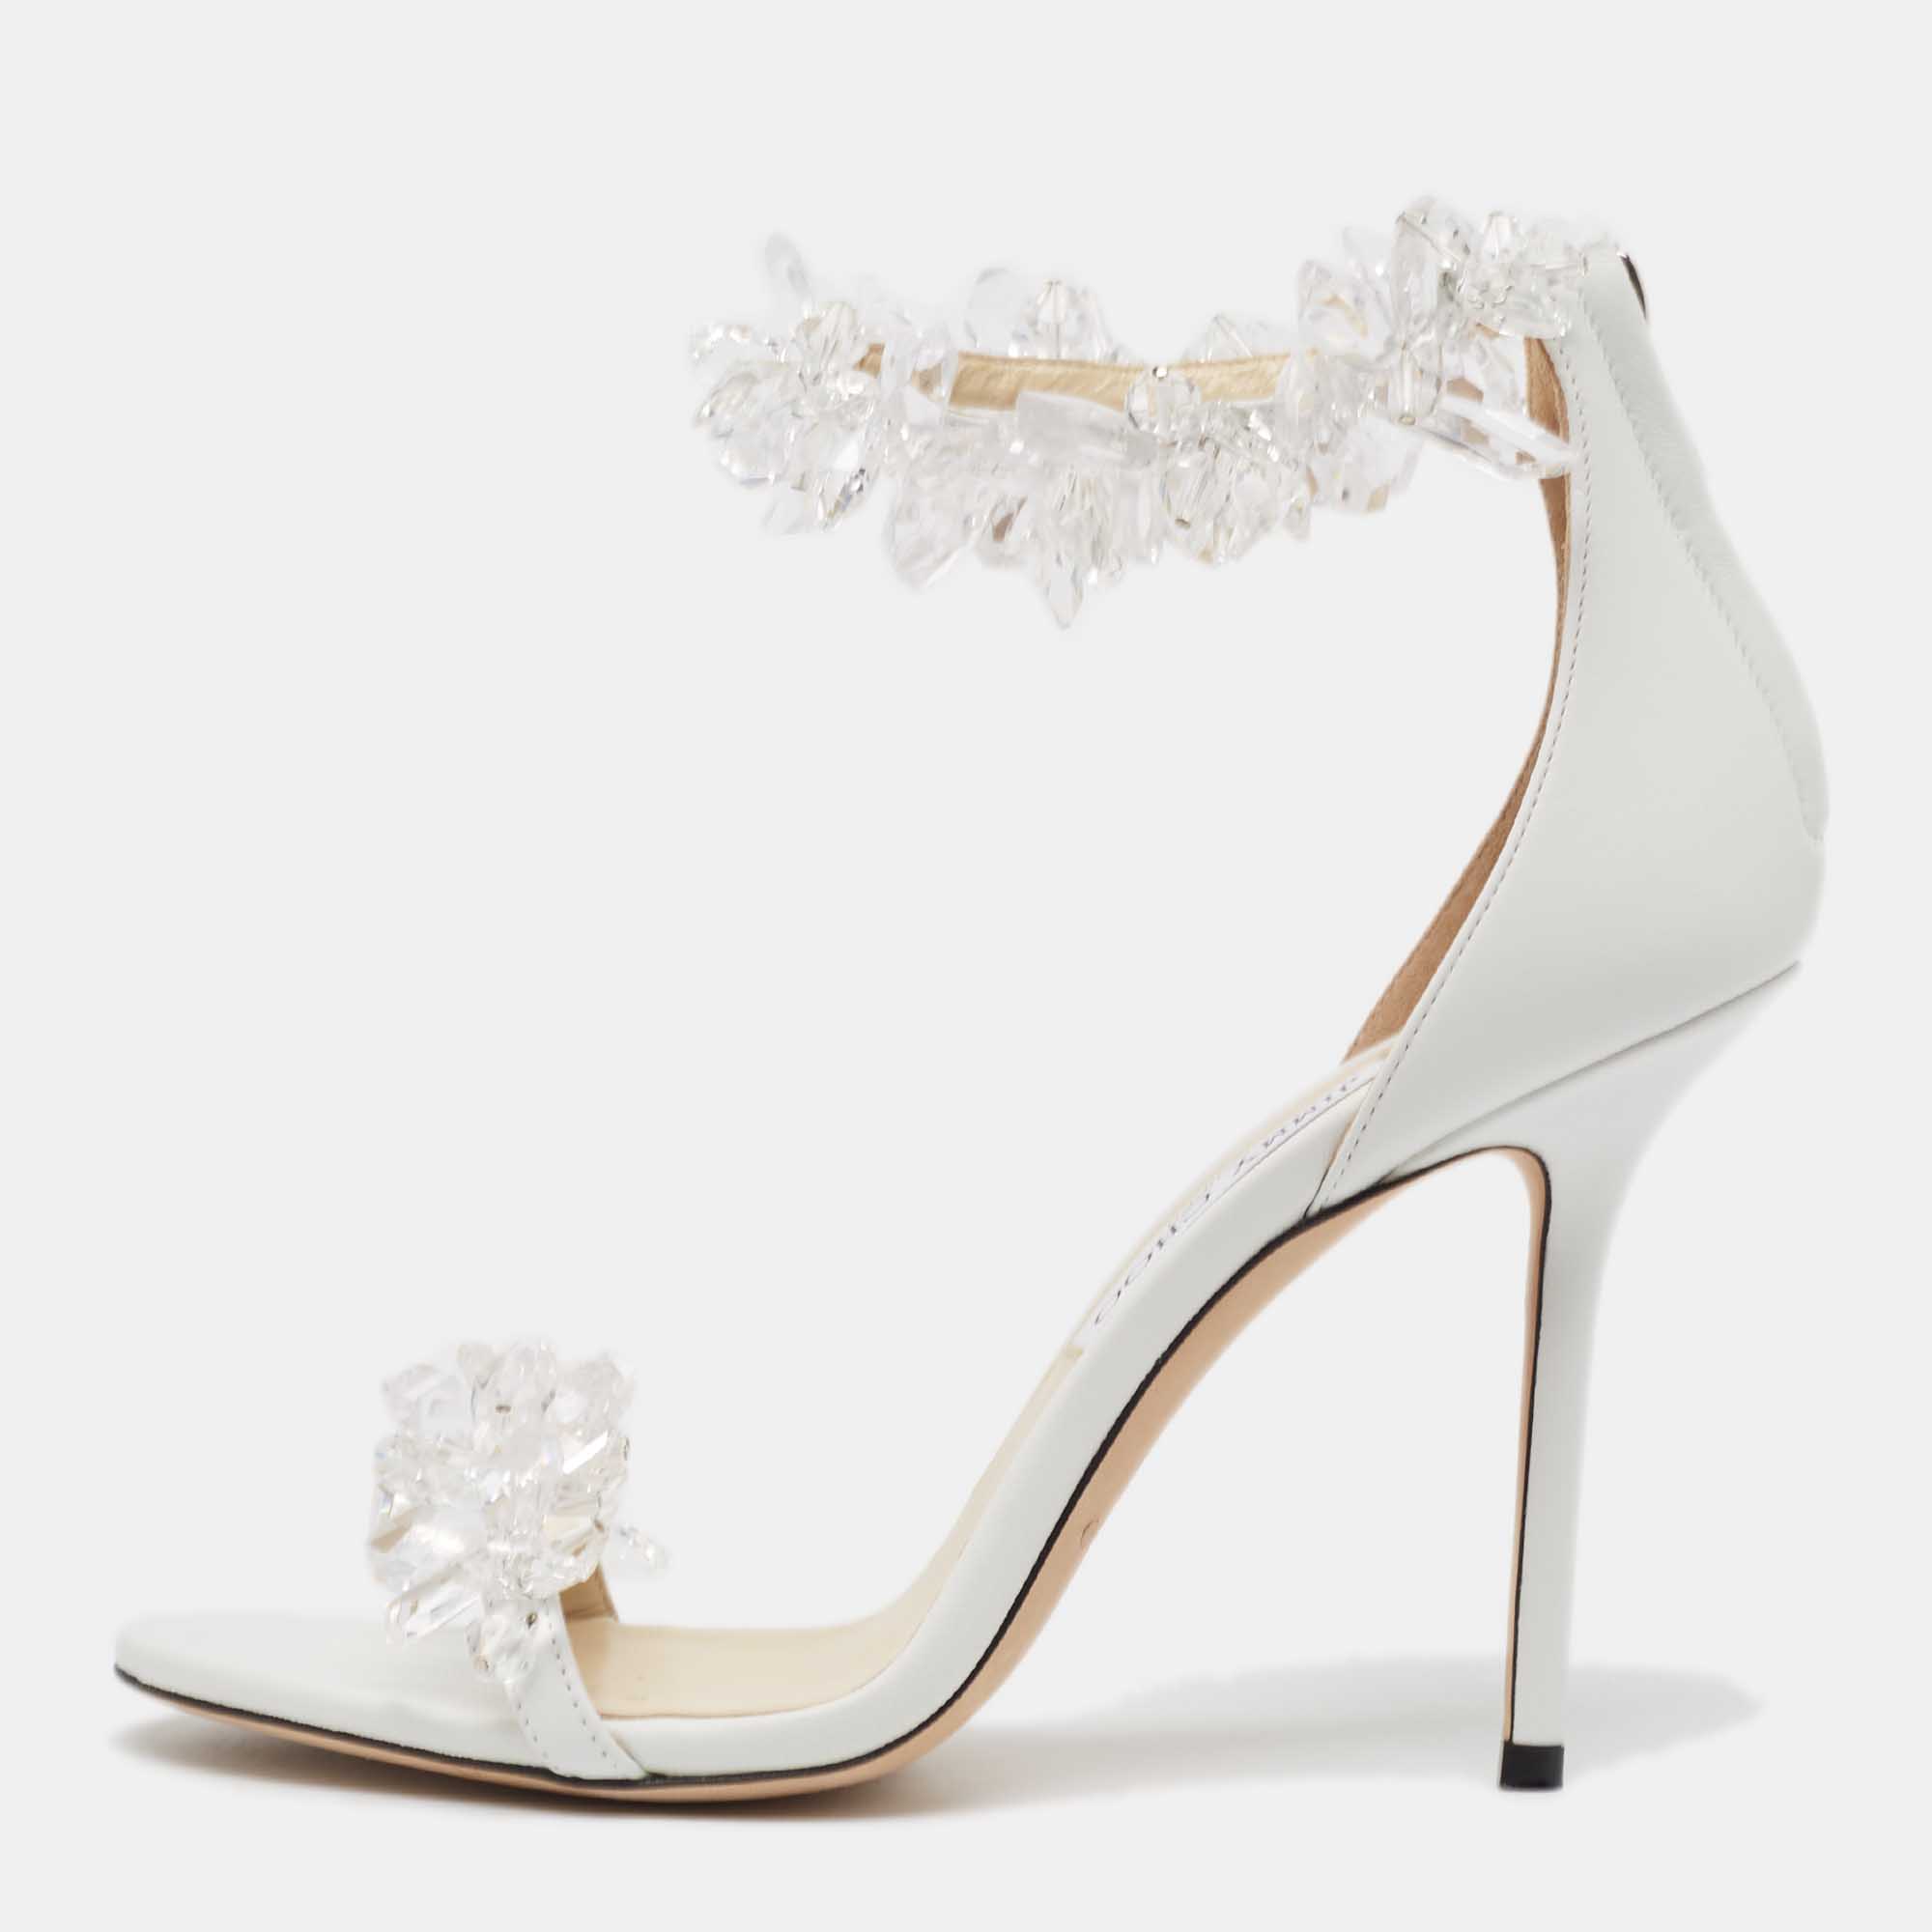 Jimmy choo white leather maisel sandals size 40